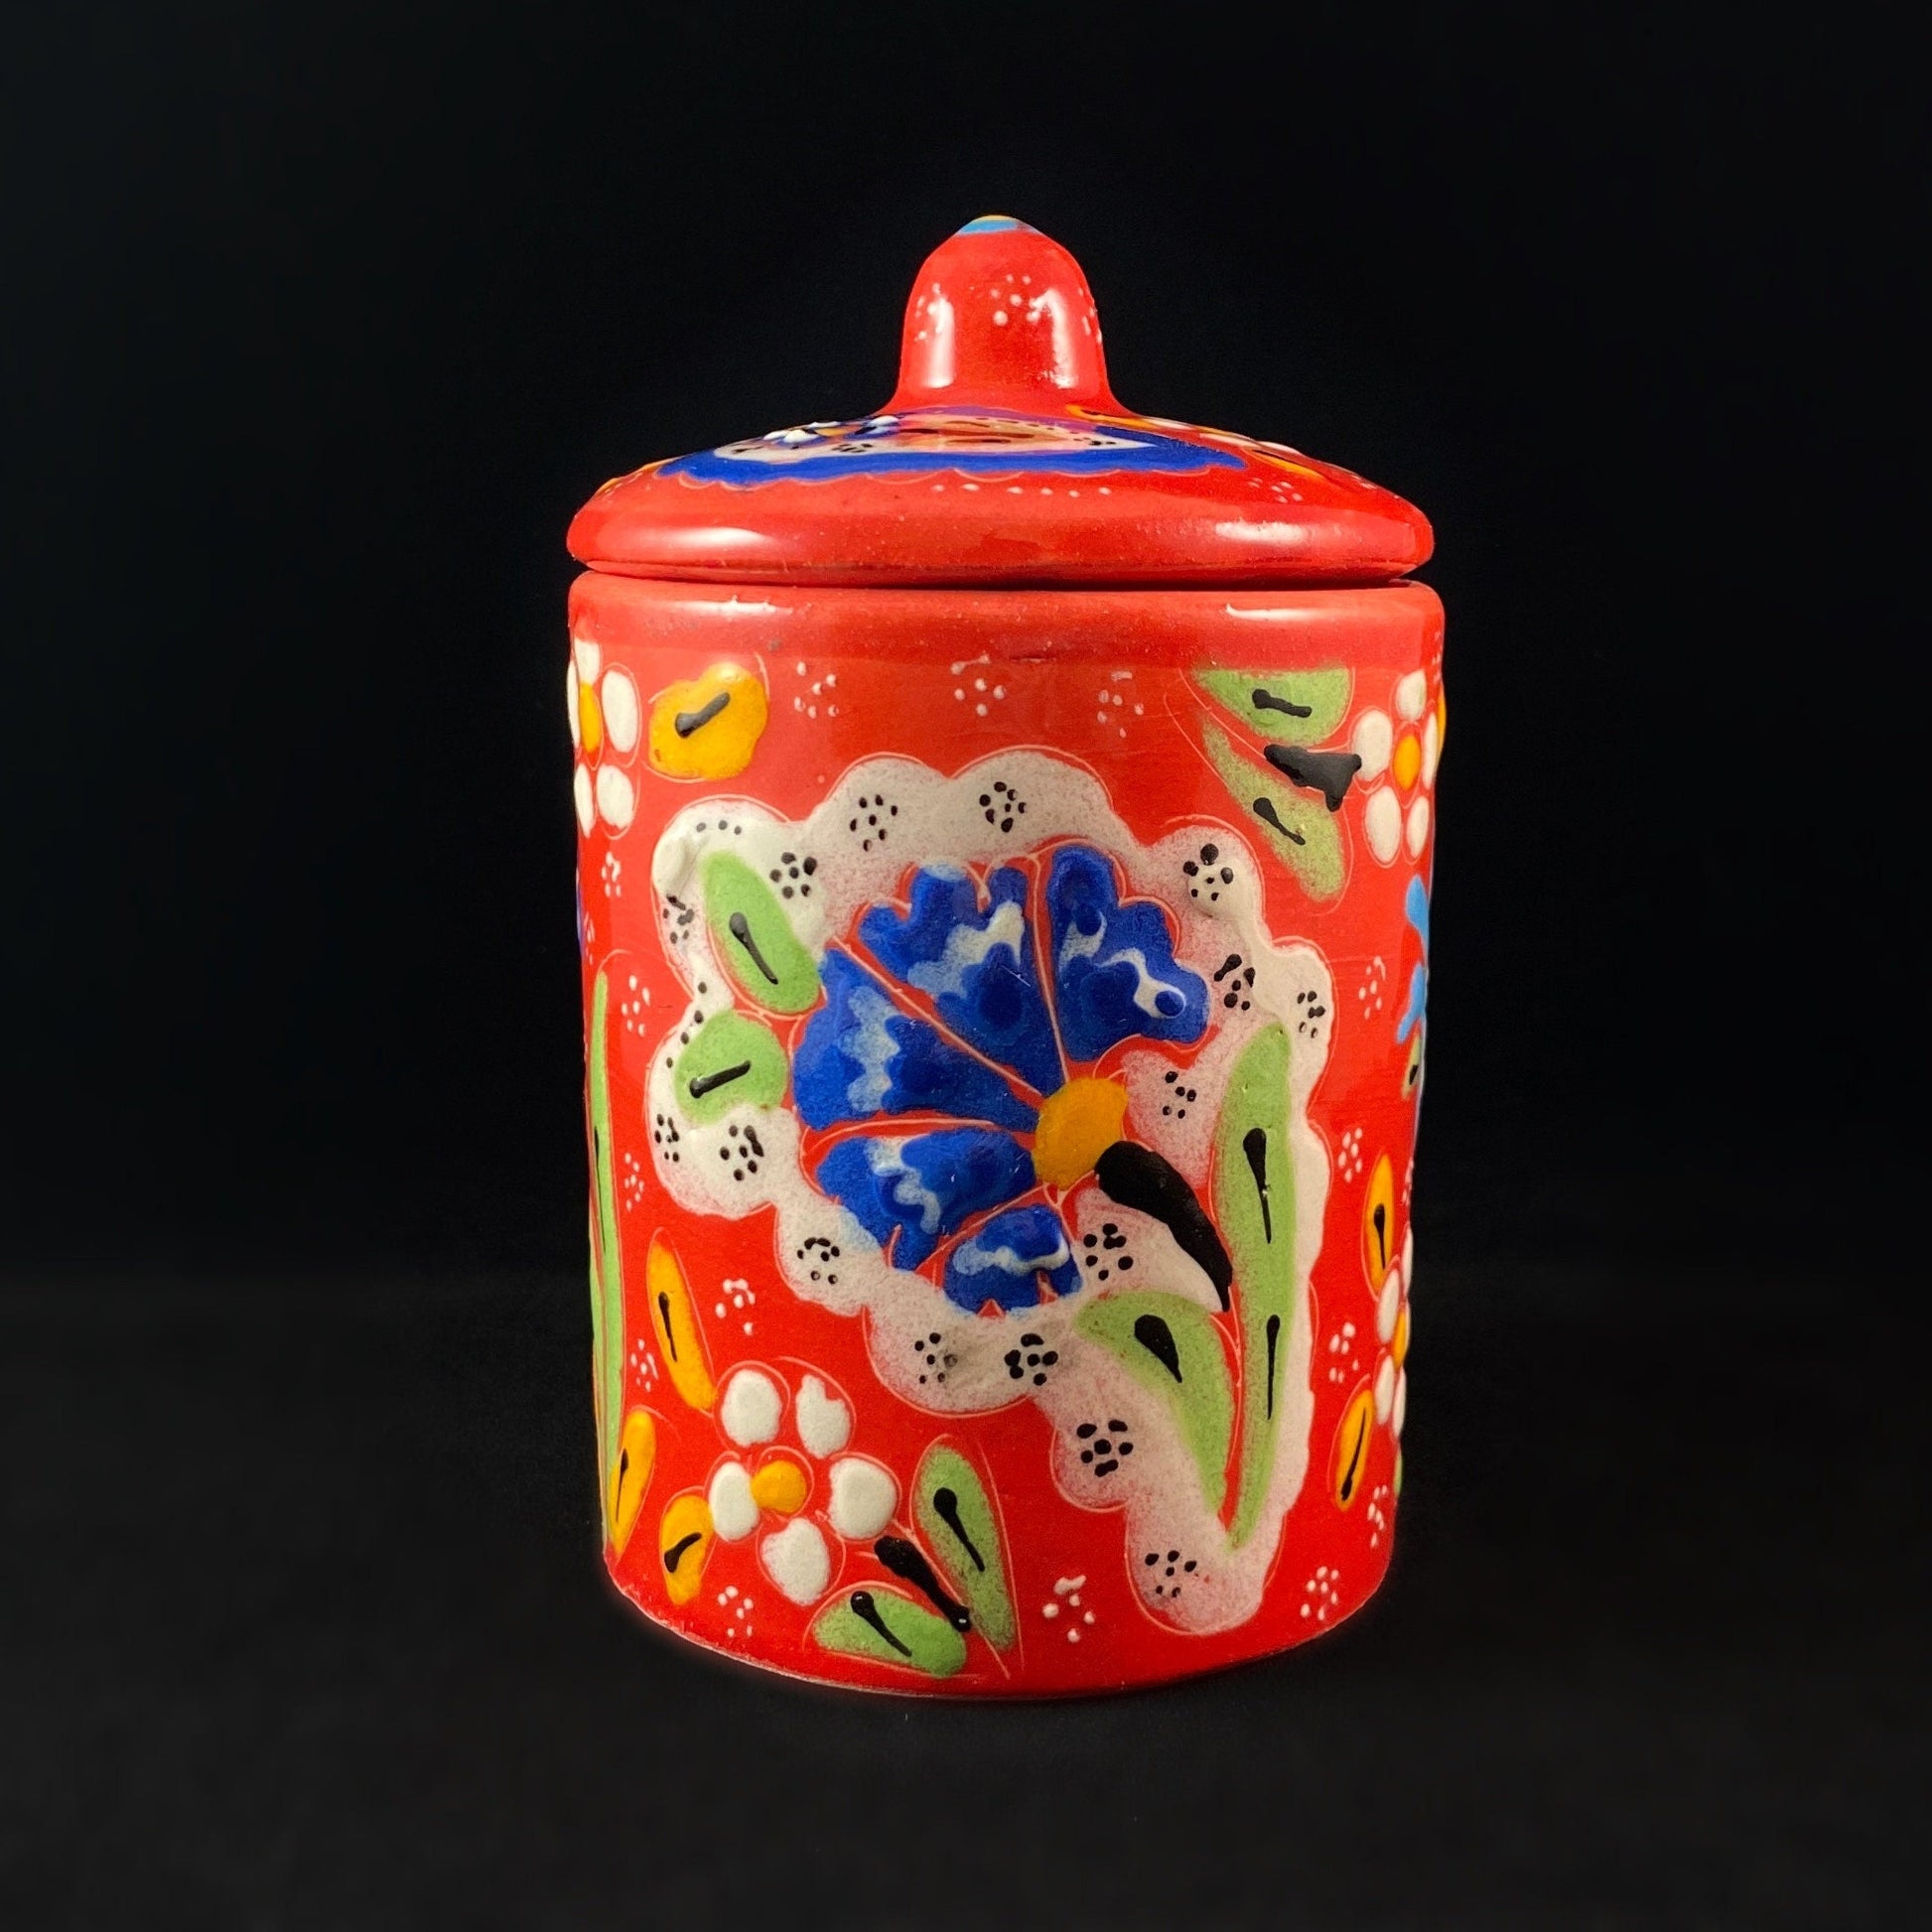 Handmade Canister with Top, Functional and Decorative Turkish Pottery, Cottagecore Style, Red